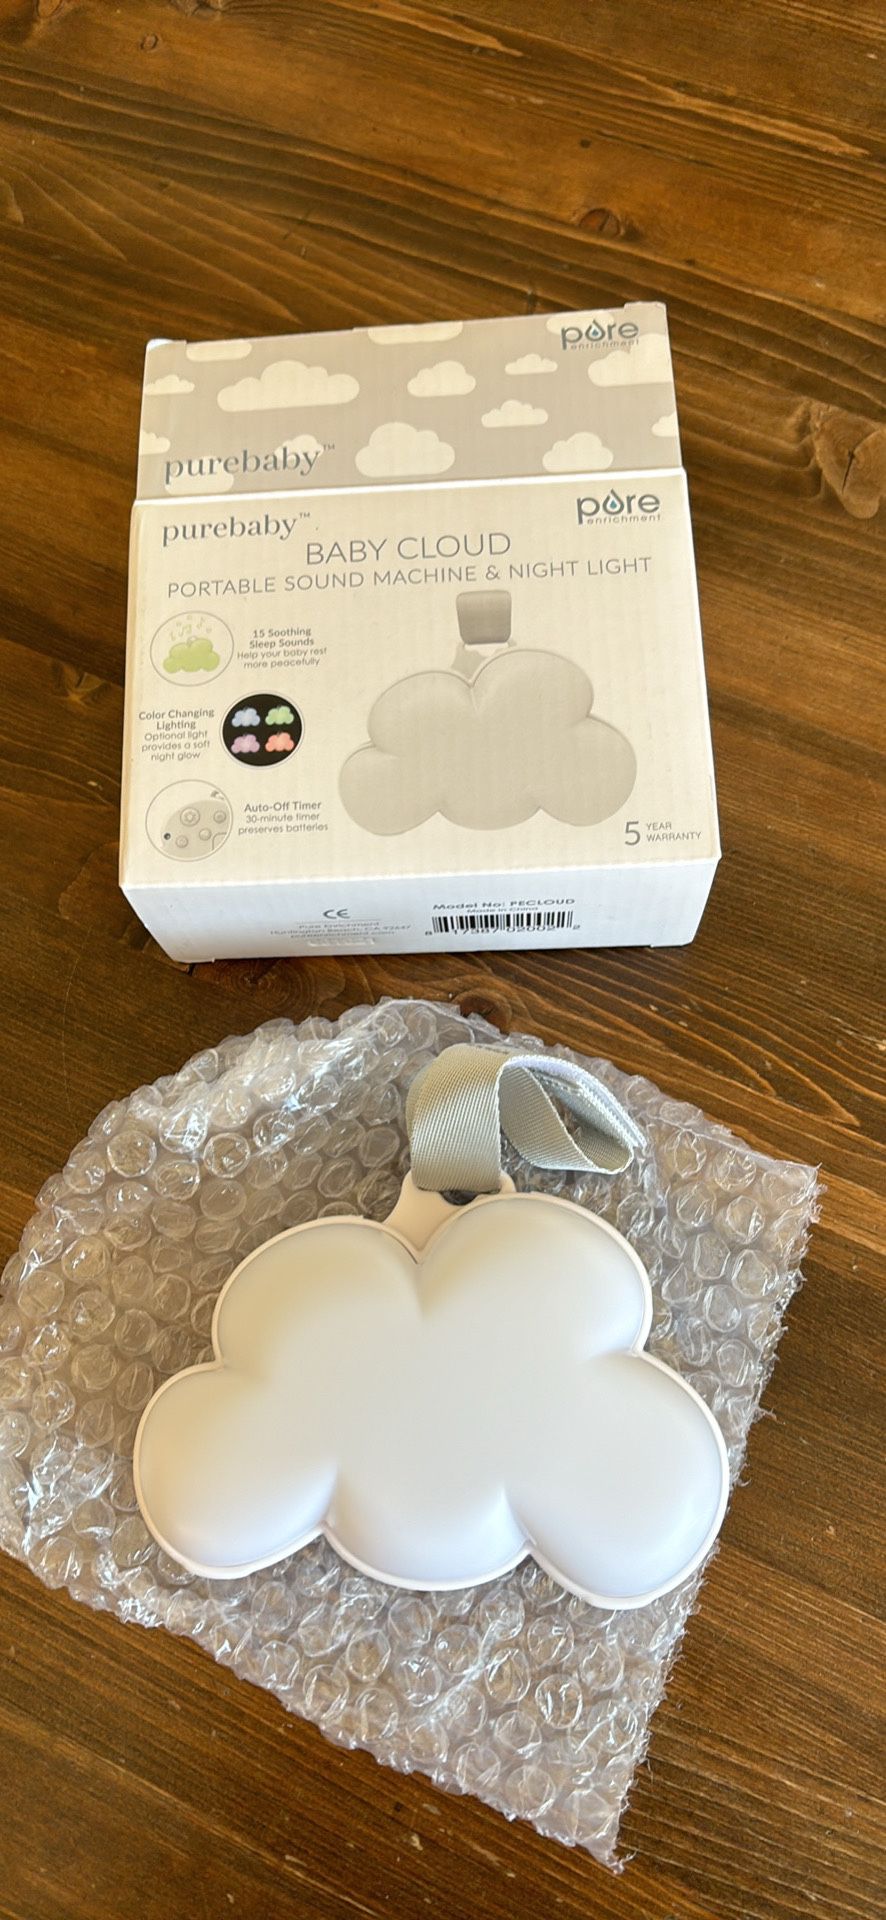 Purebaby Baby Cloud portable sound machine and night light  new in box 